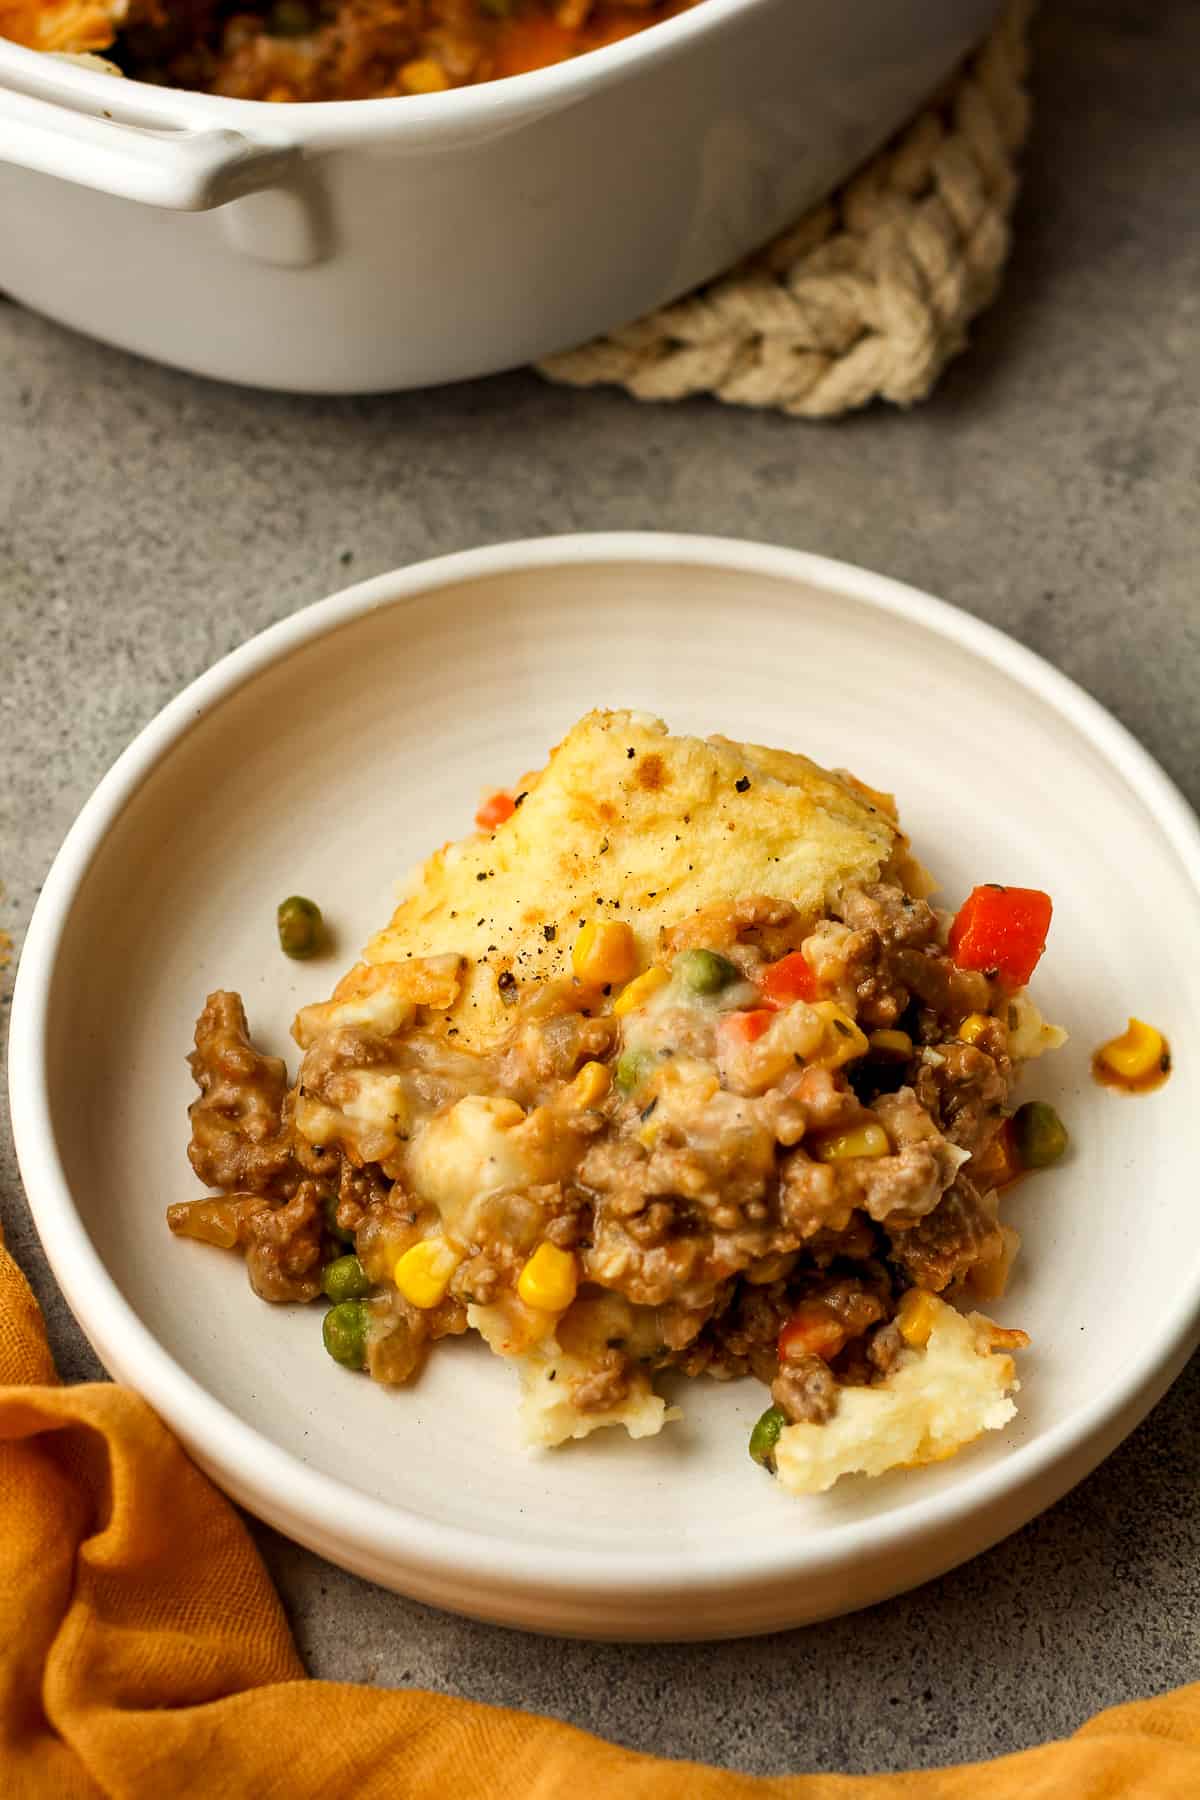 Side view of a serving of shepherd's pie with ground turkey.